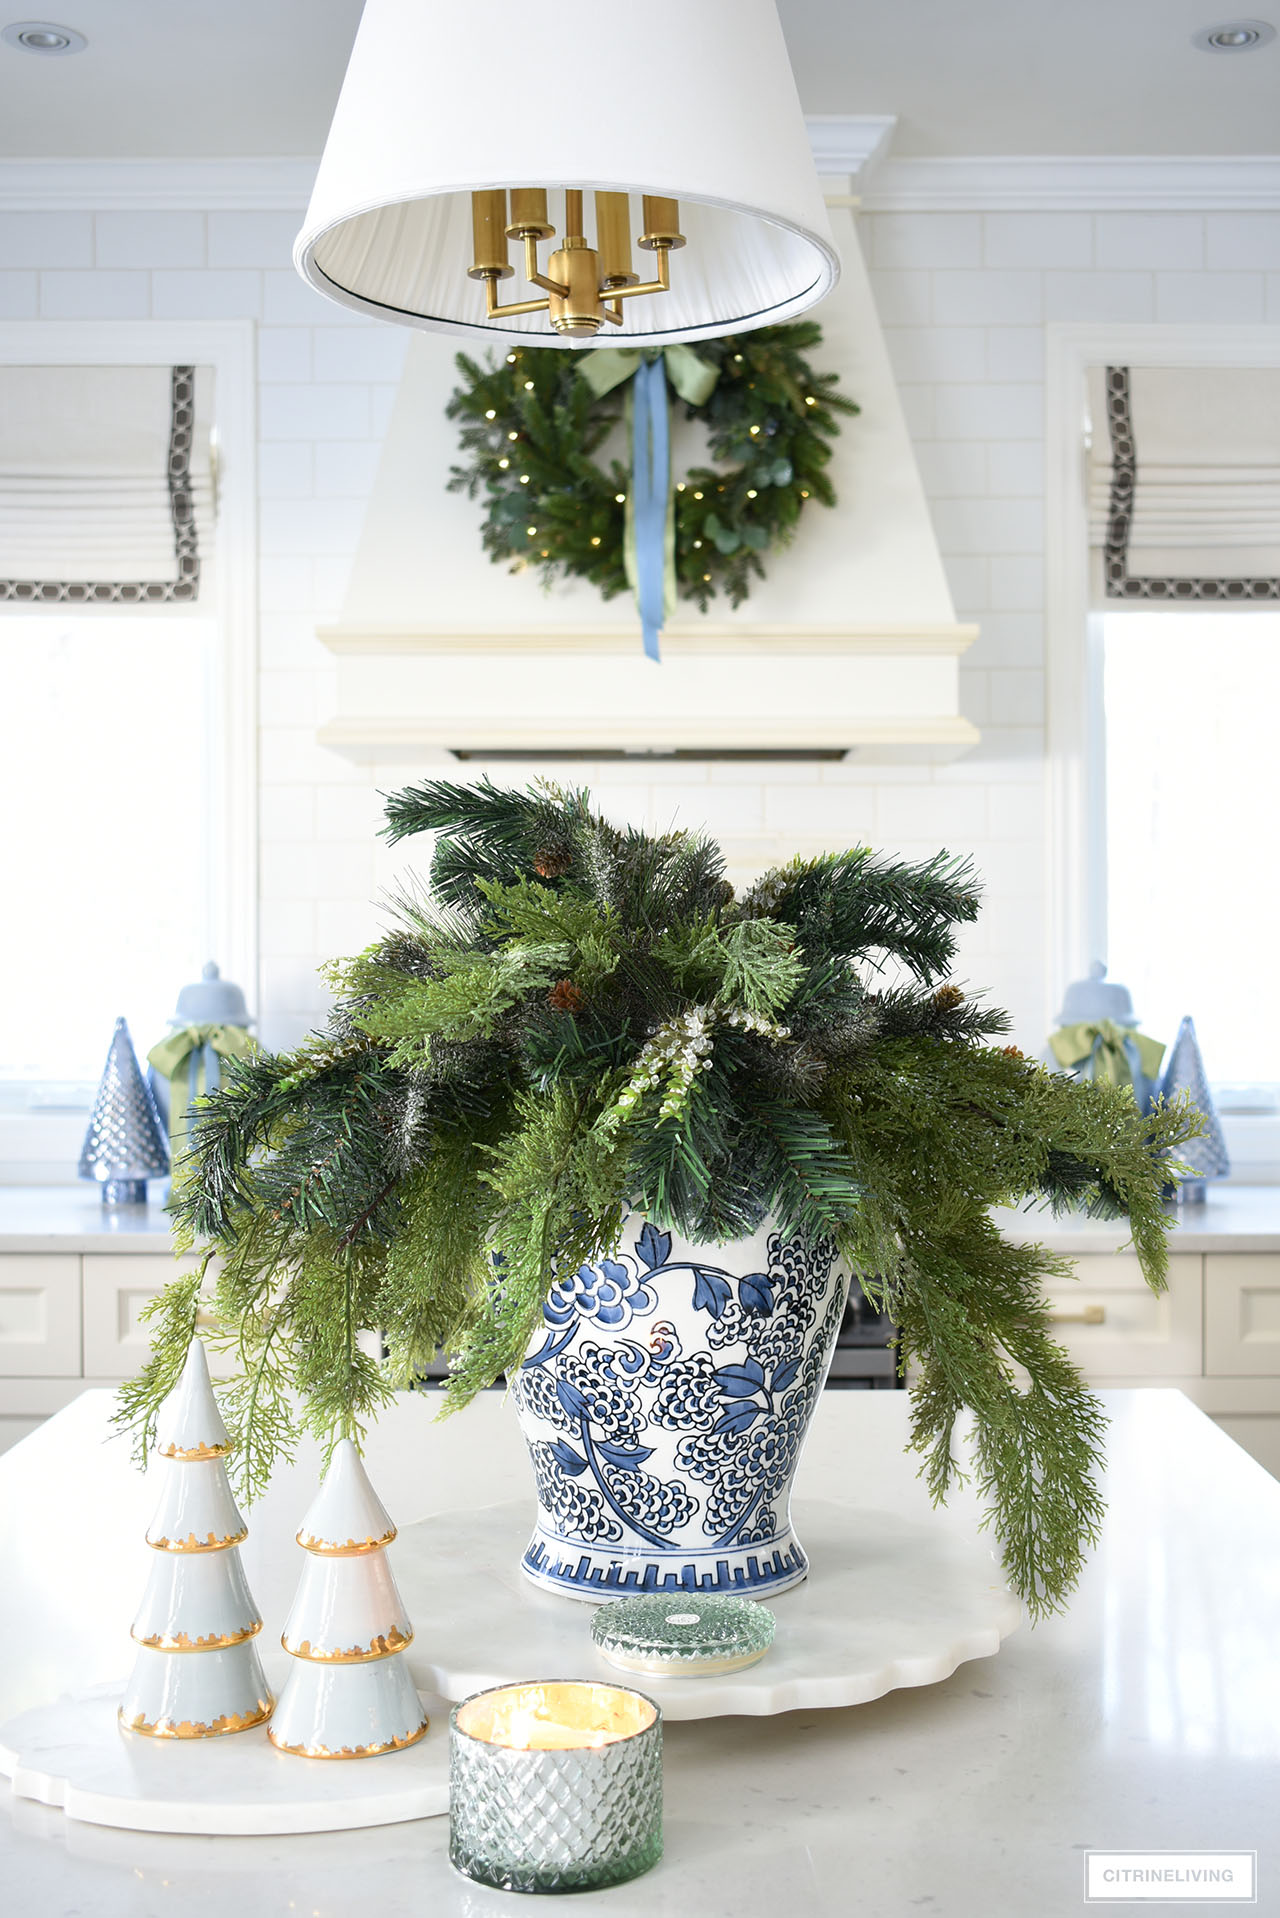 Kitchen Christmas Decorating in Blue + Green